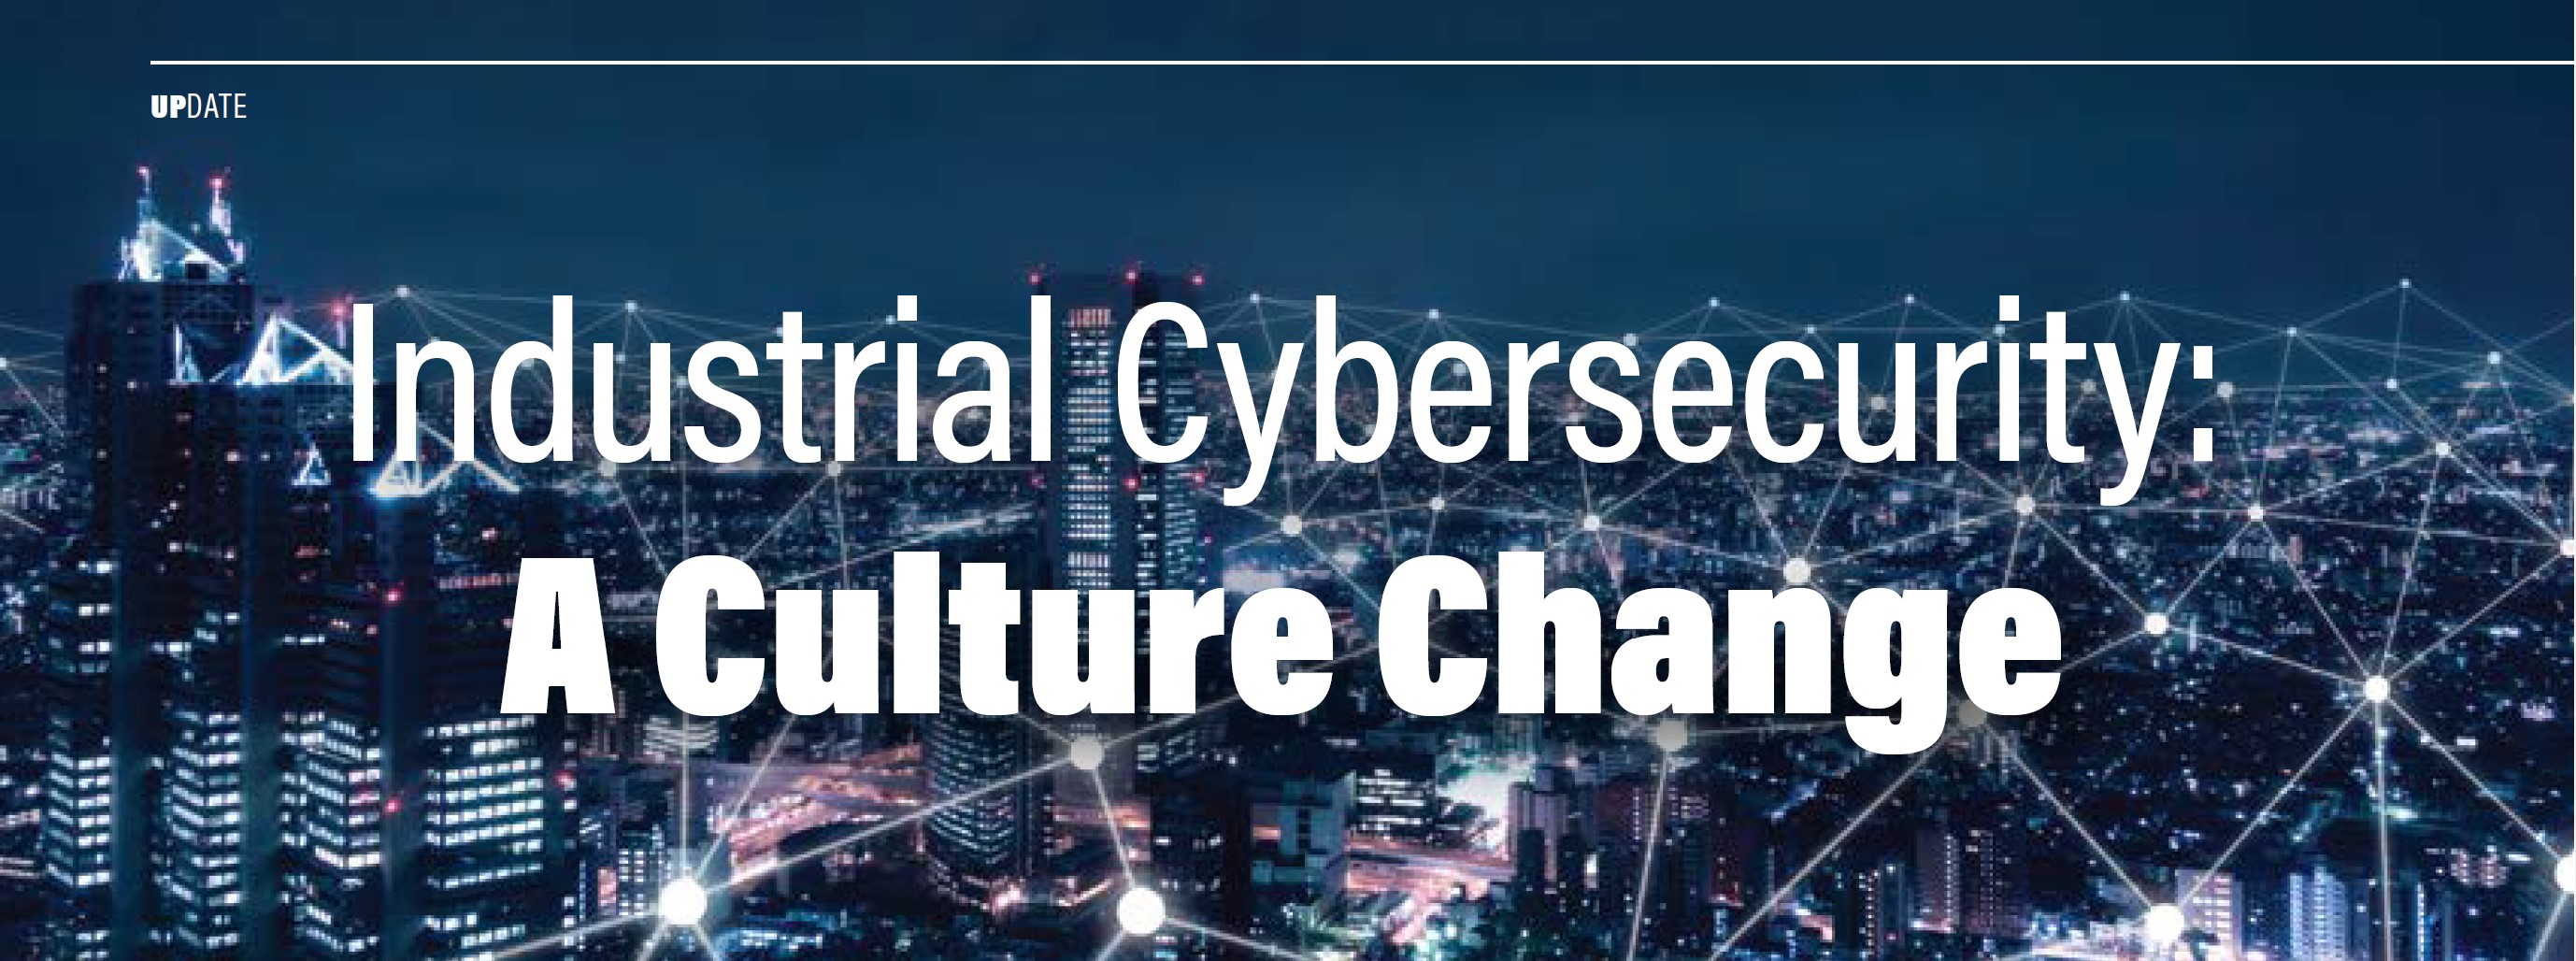 Industrial Cybersecurity: A Culture Change